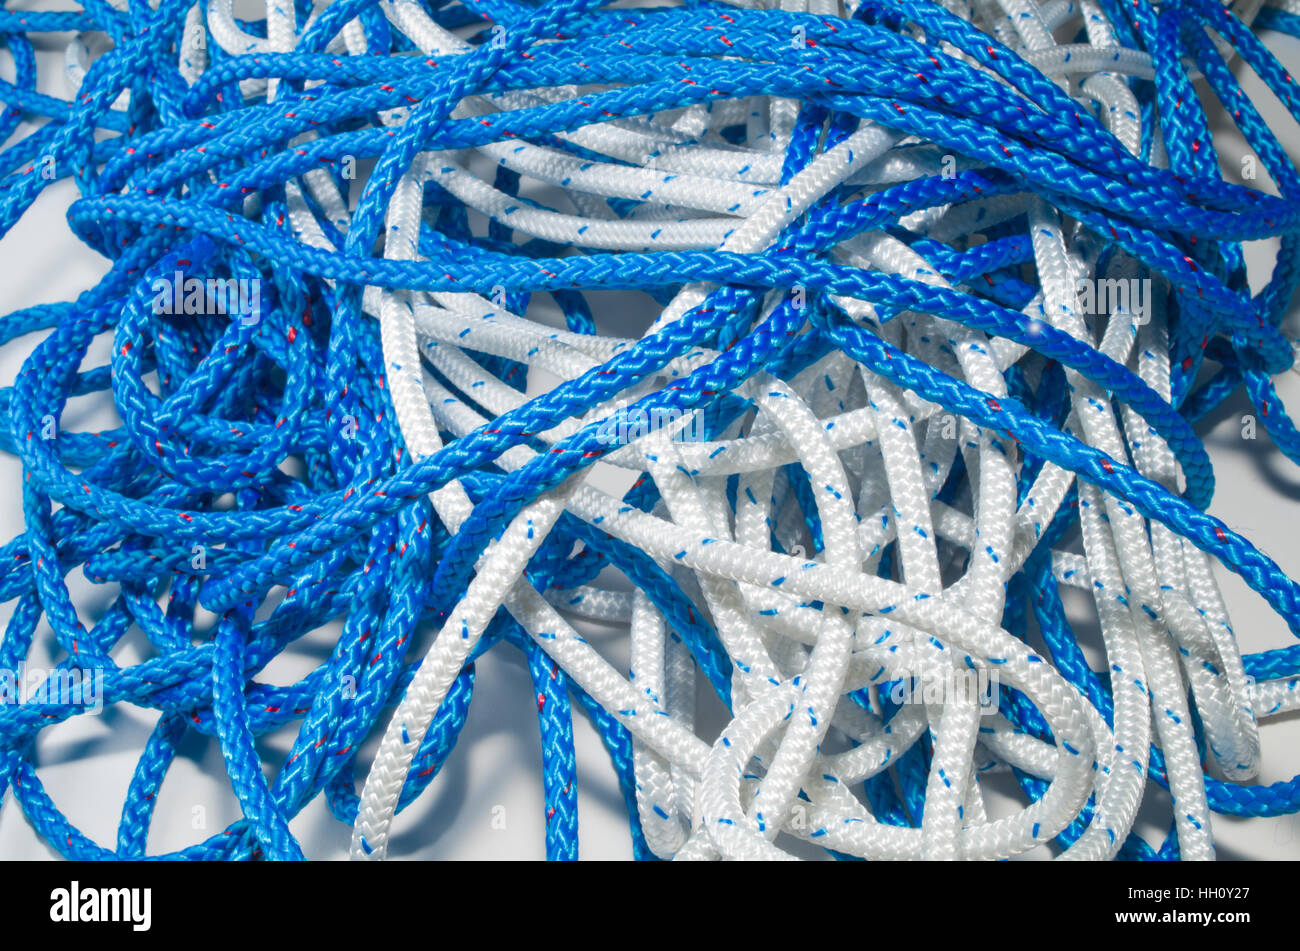 Tangled pile of blue and white plait ropes Stock Photo